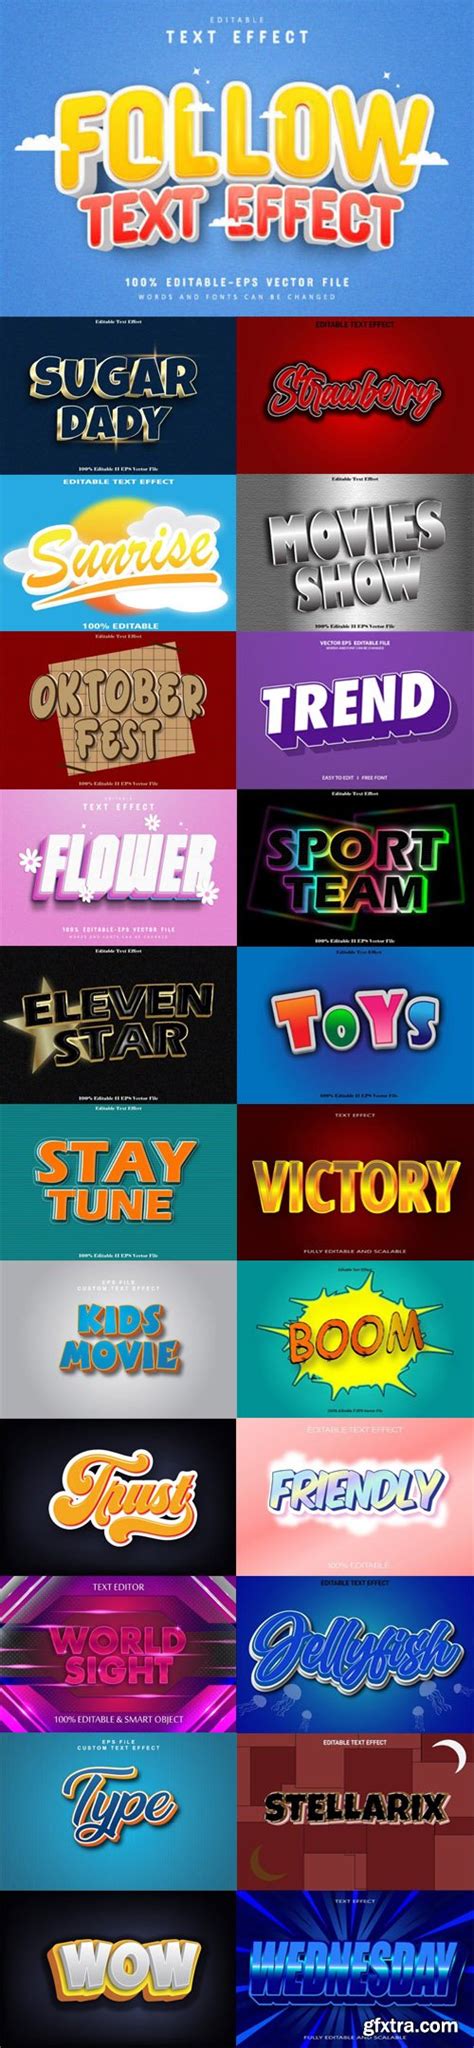 20 3d Editable Vector Text Effects Collection Gfxtra